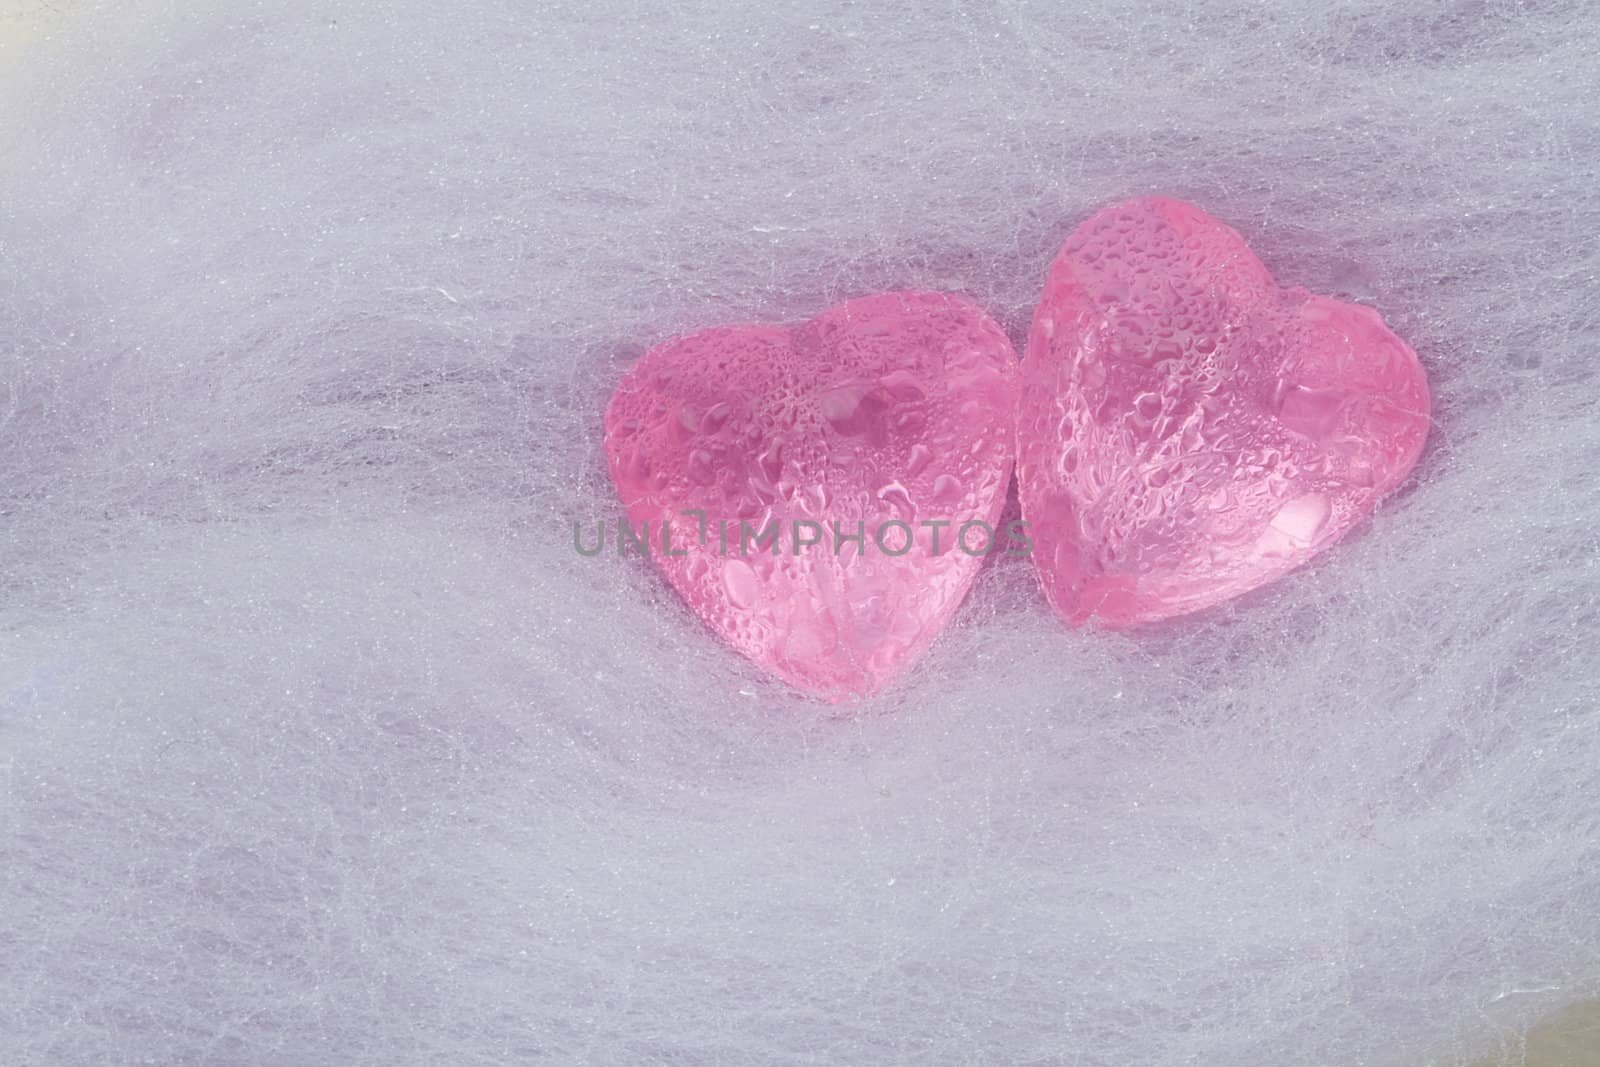 Two pink crystal hearts lie on the wool